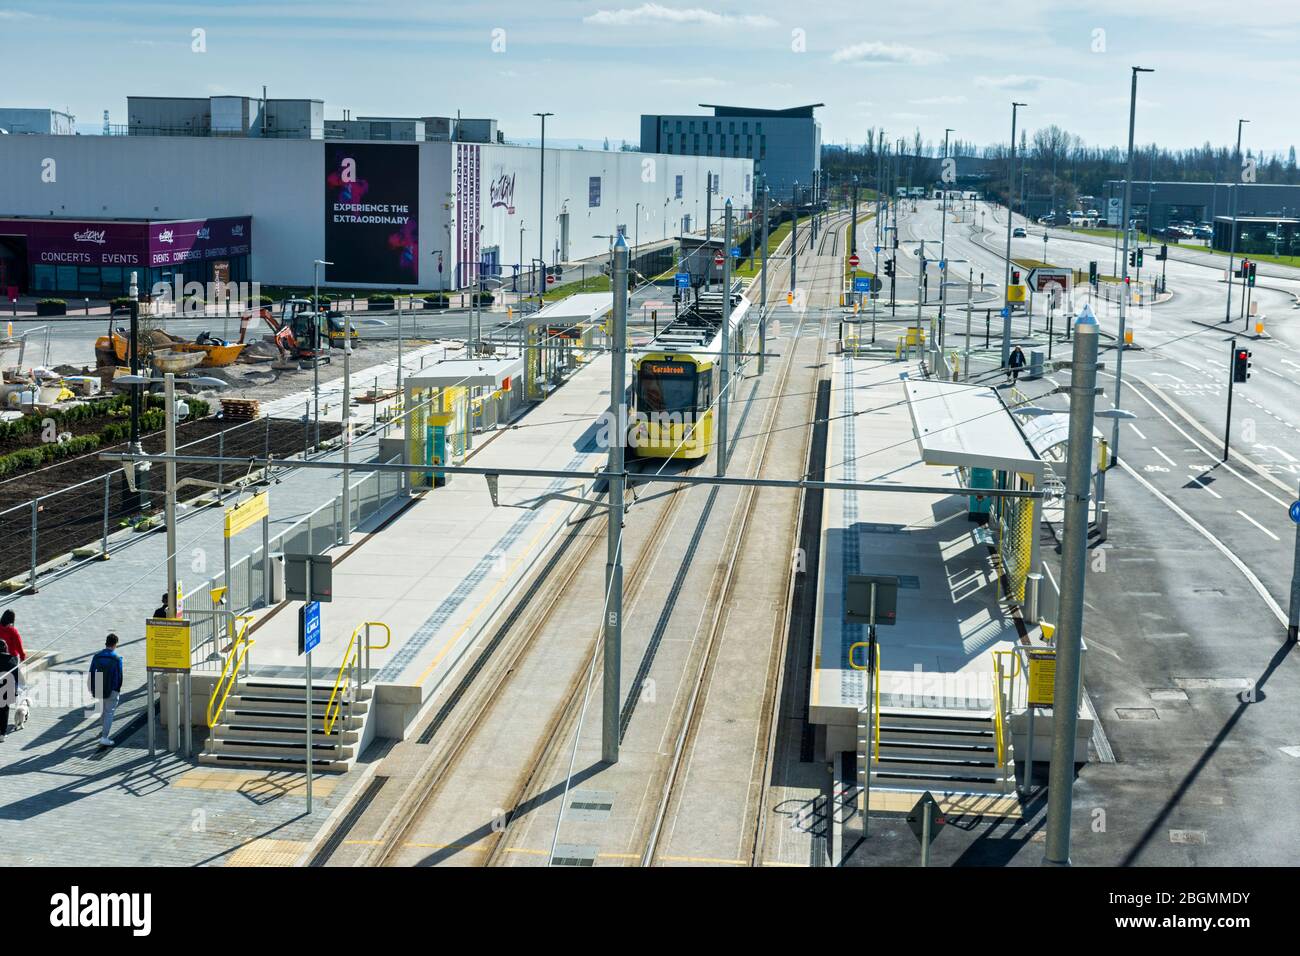 Metrolink tram at the Barton Dock Road stop on the opening day of the Trafford Park Line, 22 March 2020.  Trafford, Manchester, UK. Stock Photo